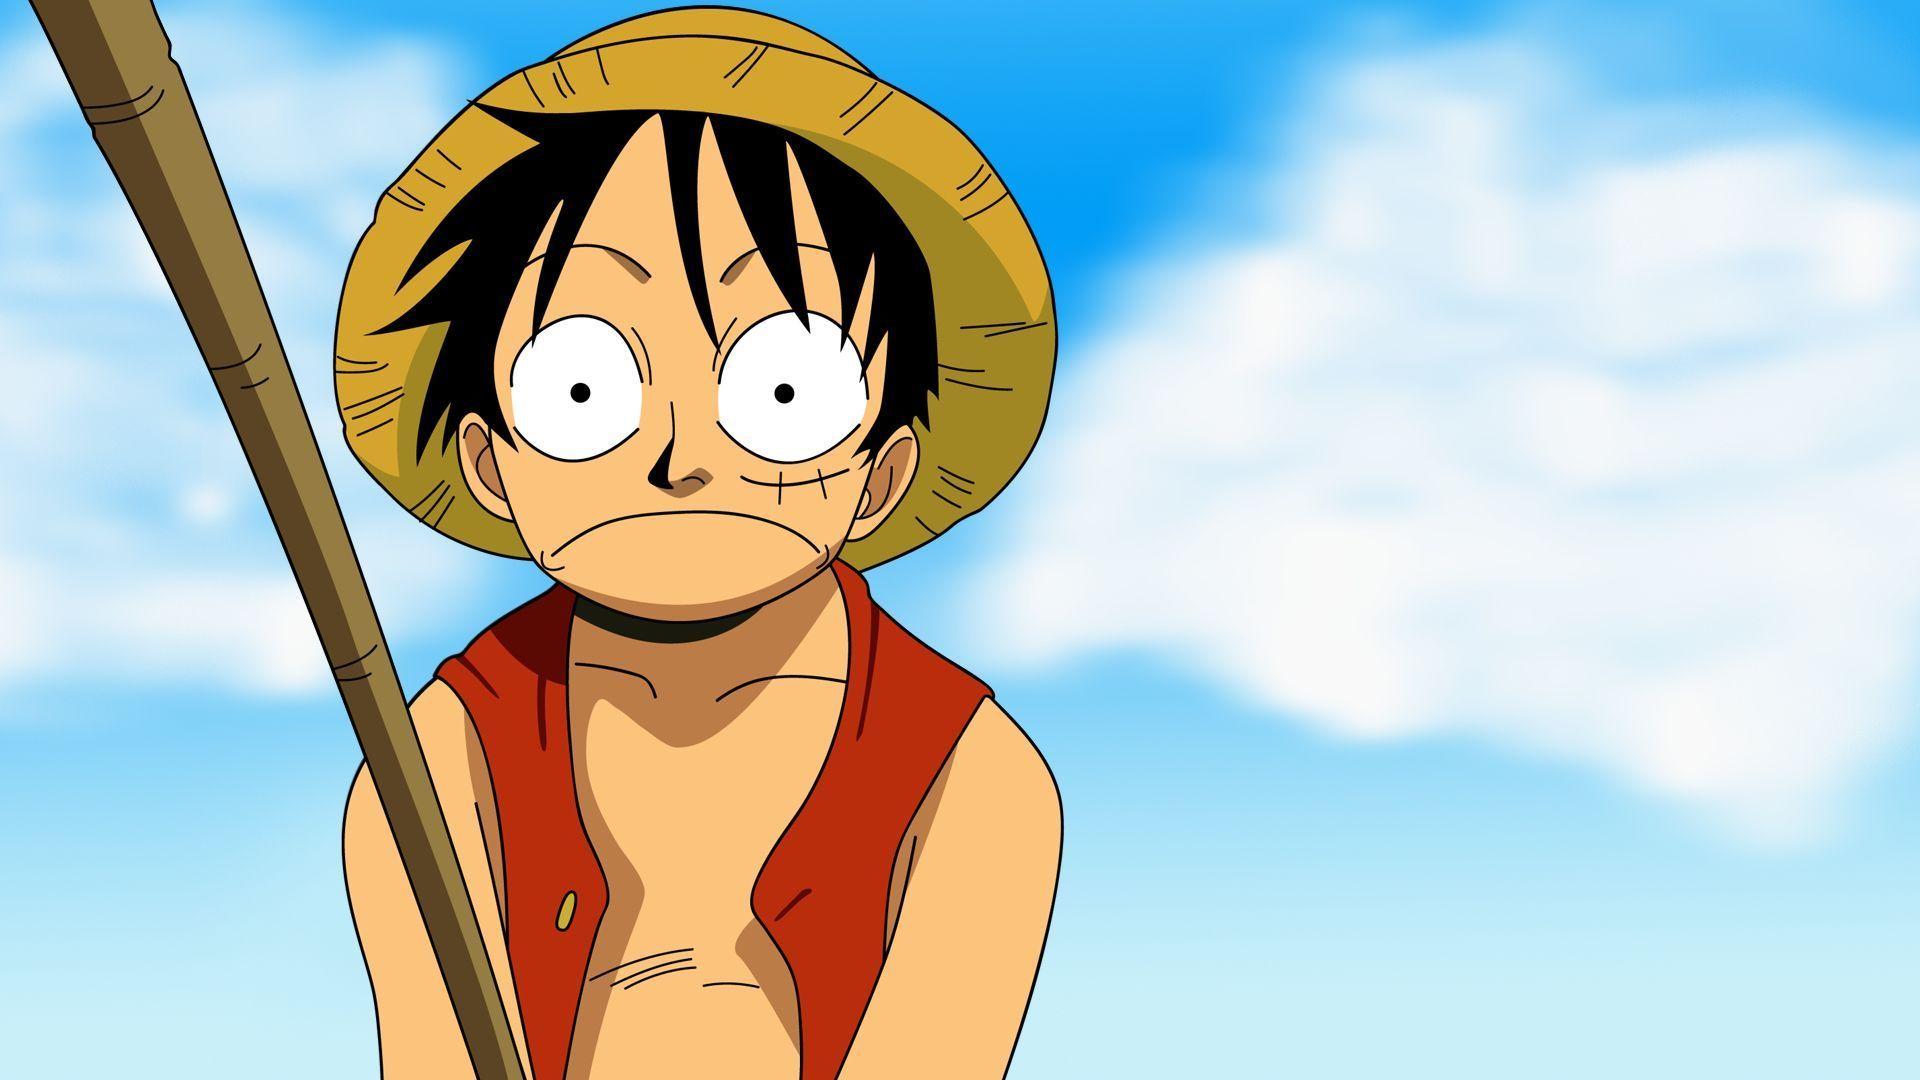 Wallpaper For > One Piece Wallpaper 1920x1080 Luffy